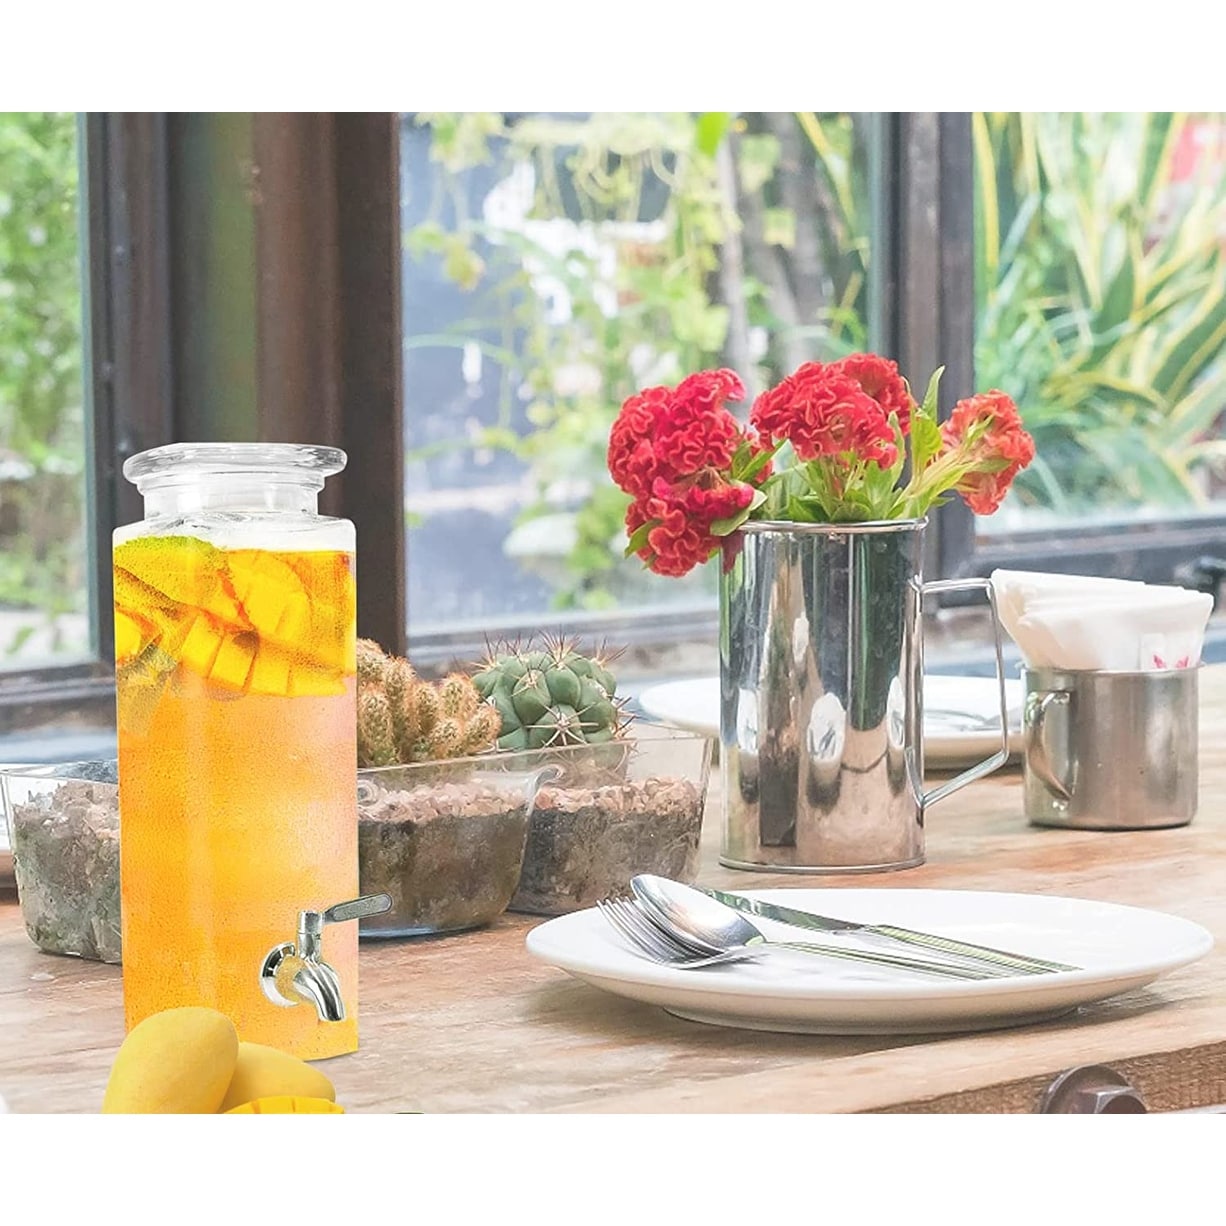 https://ak1.ostkcdn.com/images/products/is/images/direct/32aa4fb4ba96ac675b2ceab899bb53aaa8d70622/Tall-Square-Glass-Mason-Jar-Drink-Dispenser-With-Stainless-Steel-Spigot%2C-80-oz-%282.36-Liters%29.jpg